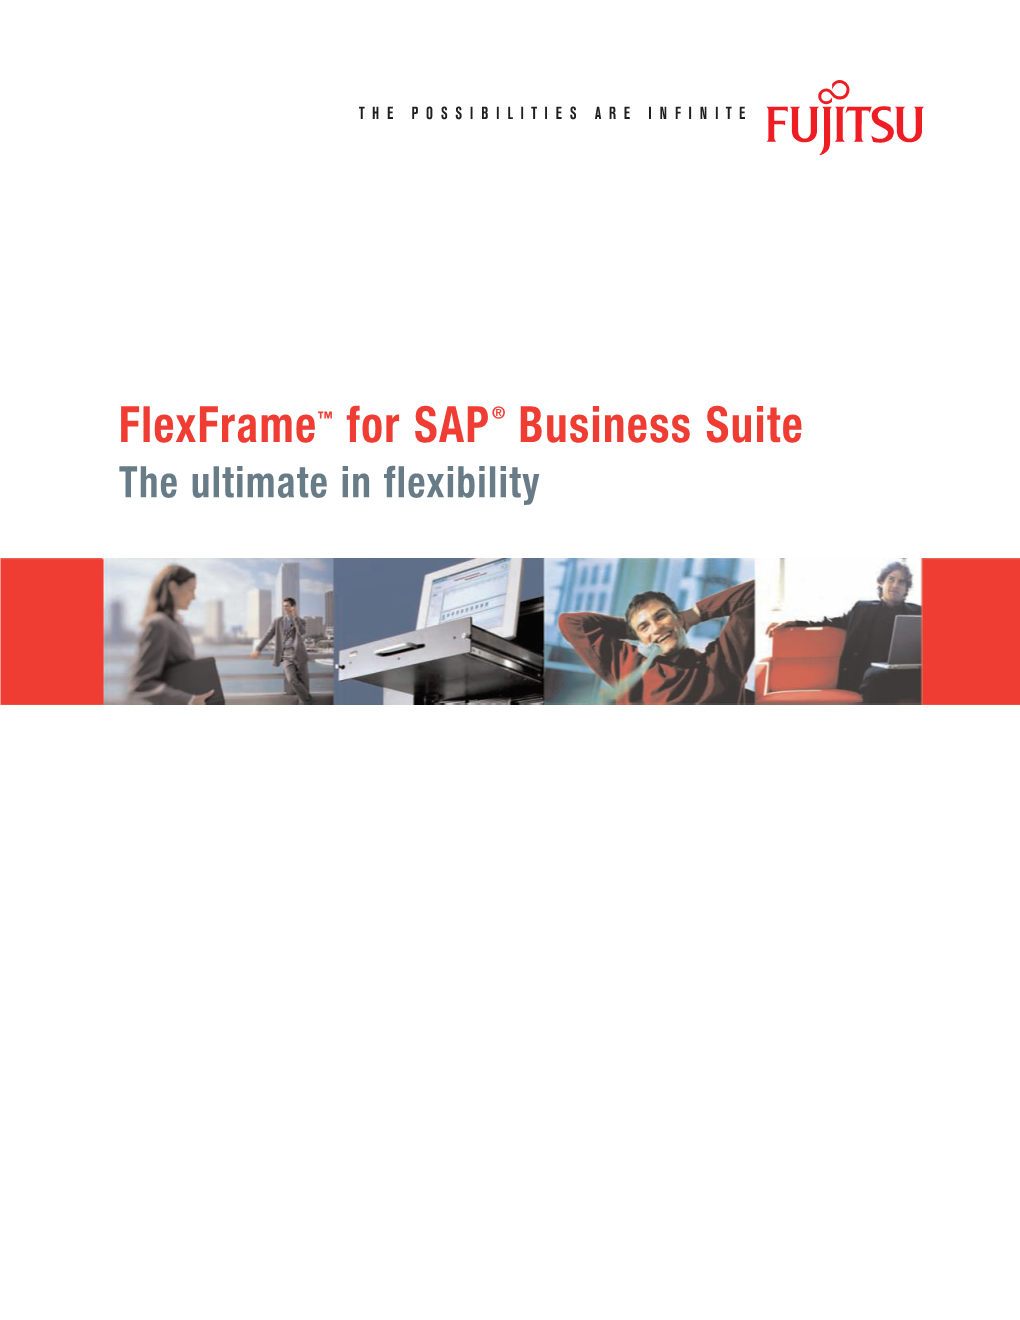 Flexframe™ for SAP® Business Suite the Ultimate in Flexibility Flexframe Gives You a Bridge to an Efficient, Economical IT Infrastructure